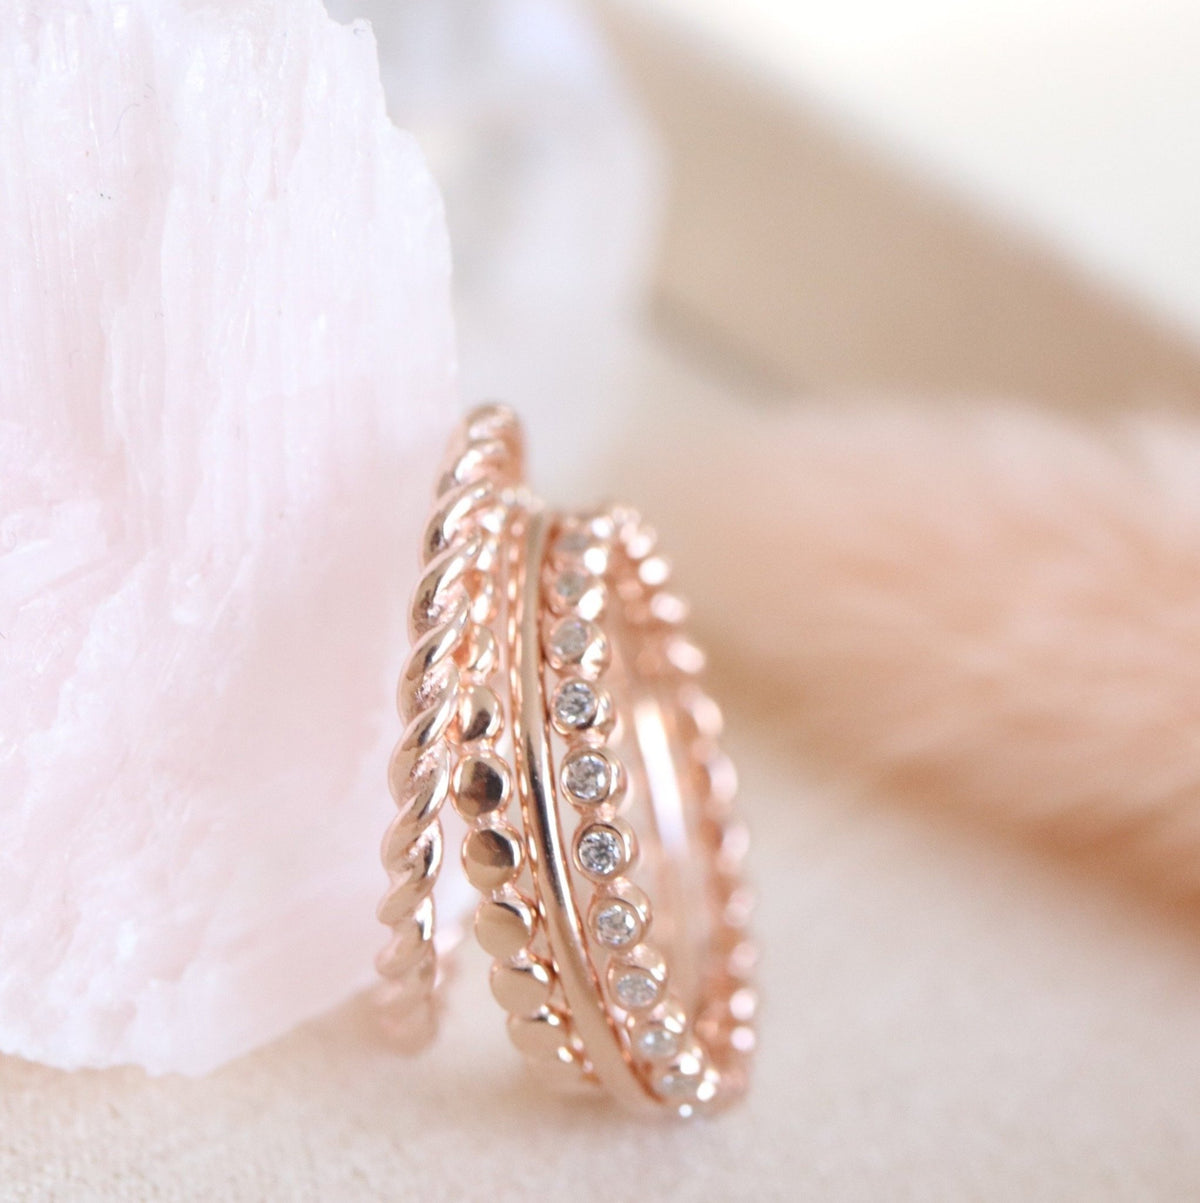 POISE THIN DISK BAND RING - ROSE GOLD - SO PRETTY CARA COTTER